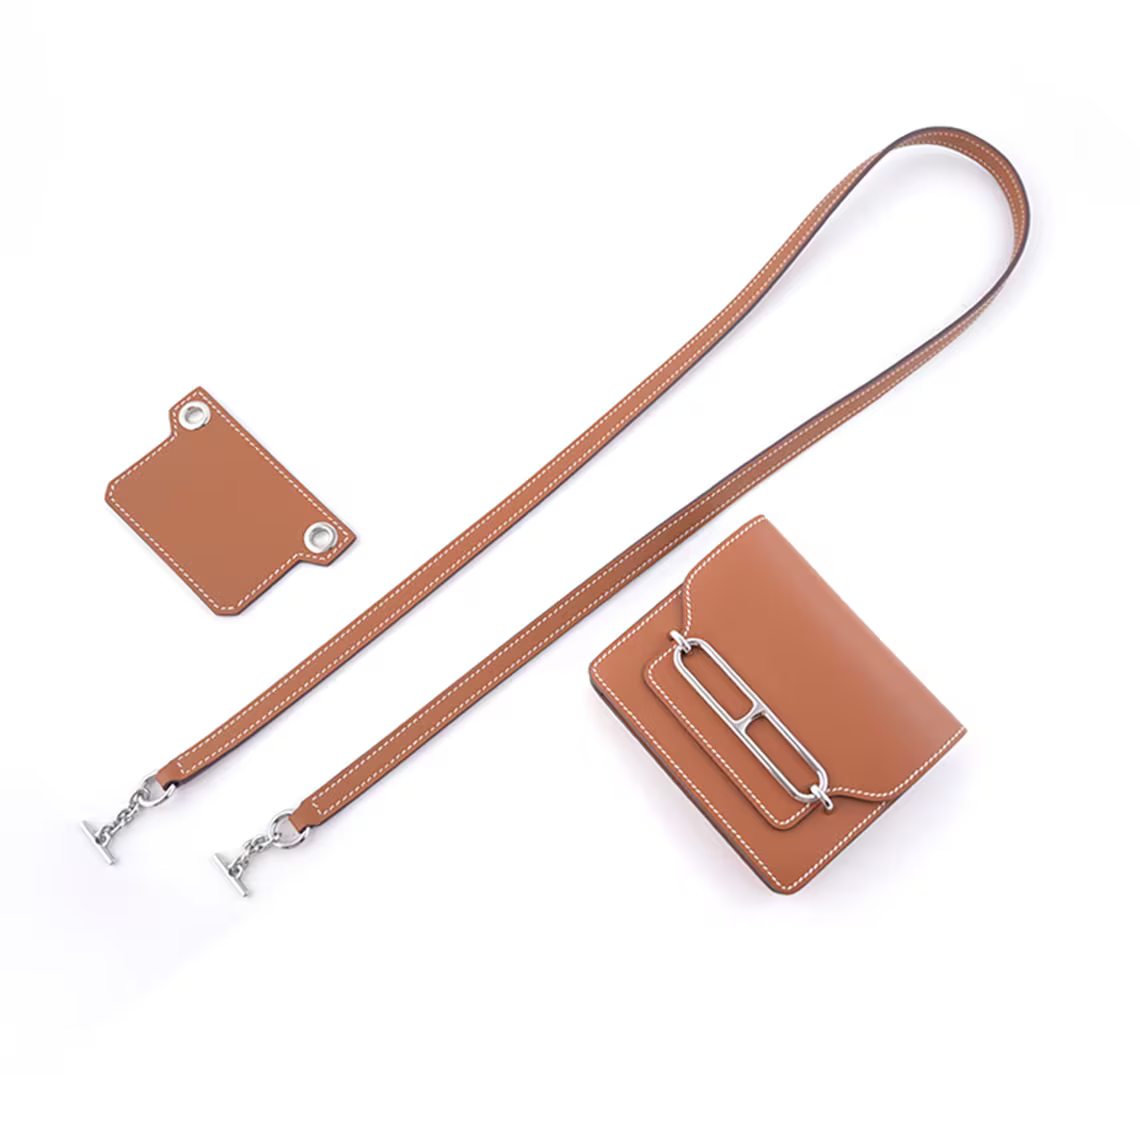 Fully handmade customizable Bag Extension Straps, Vachetta Leather Ext